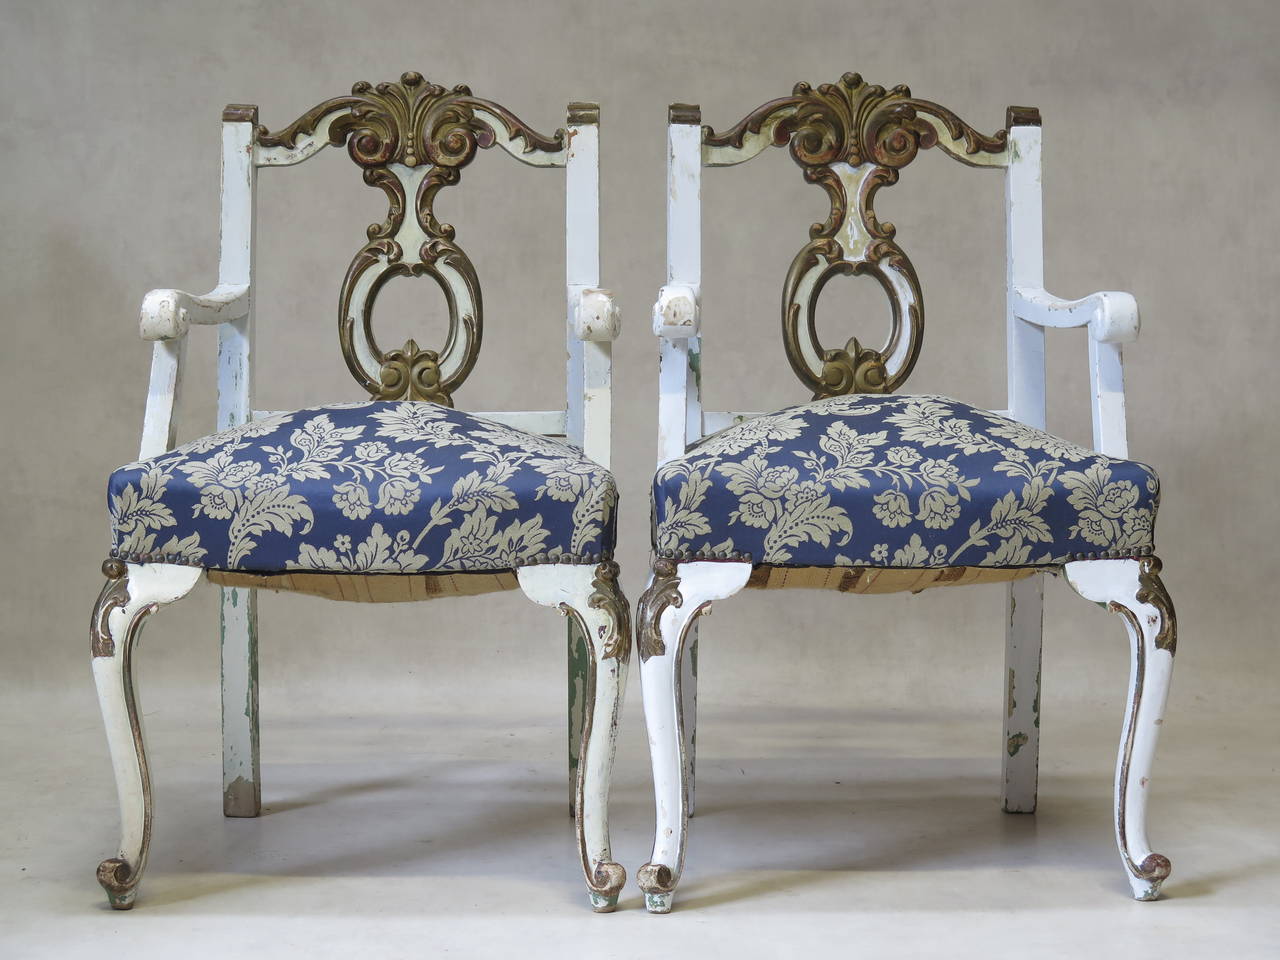 Charming pair of early twentieth century Louis XV style armchairs, painted white with burnished gold accents, and an earlier light green paint visible beneath. Boldly carved. The armrests end in scrolls. Cabriole front legs with embellished knees